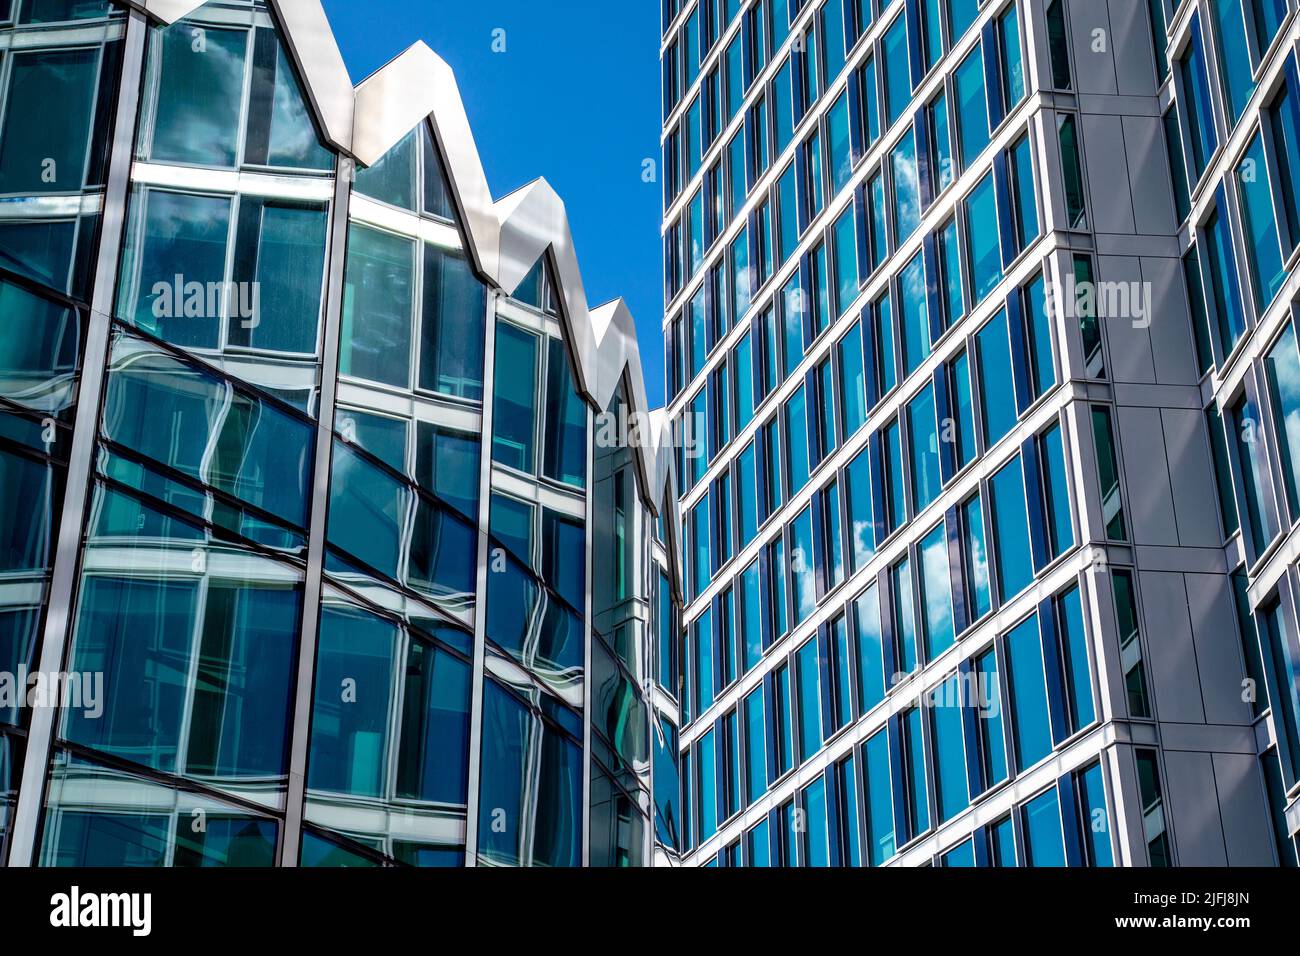 Exterior glass and steel PKO Rotunda building and Widok Towers, popular meeting place in the center of Warsaw, Poland Stock Photo